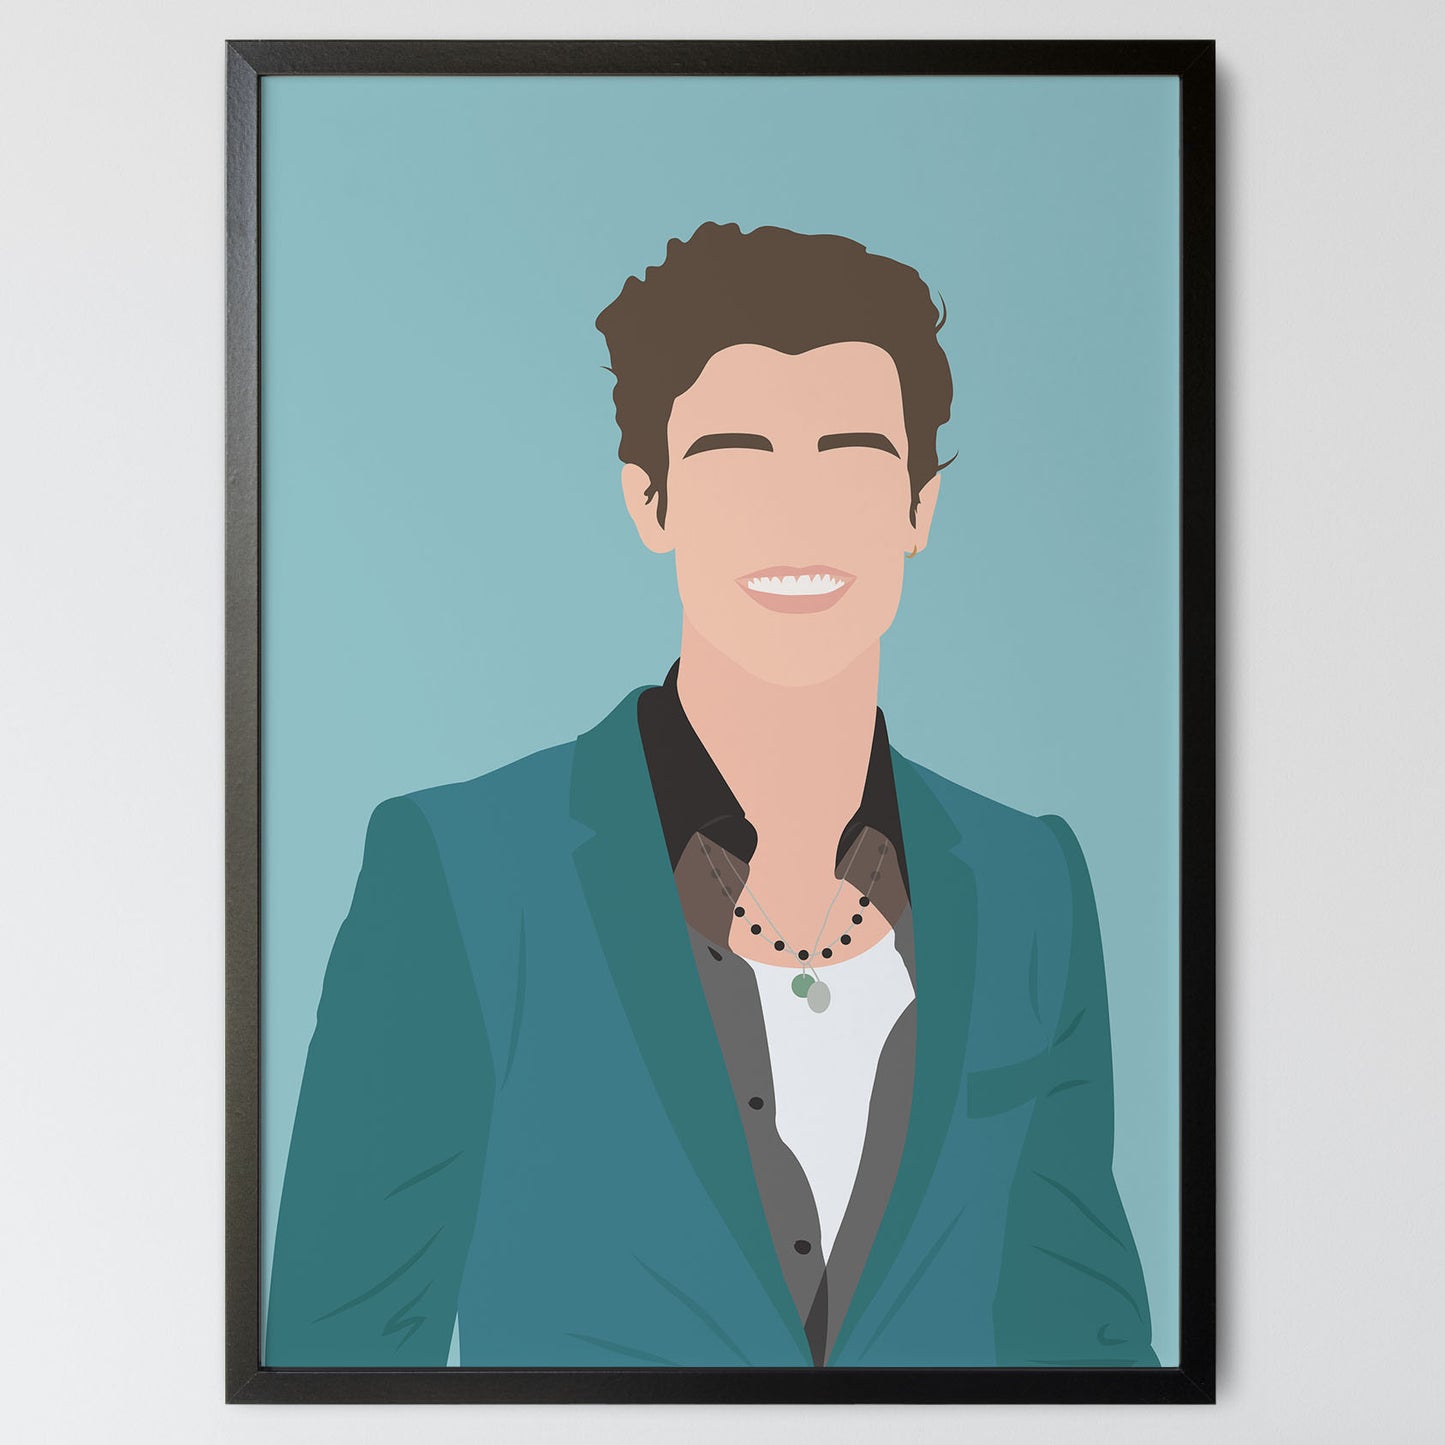 Shawn Mendes Poster